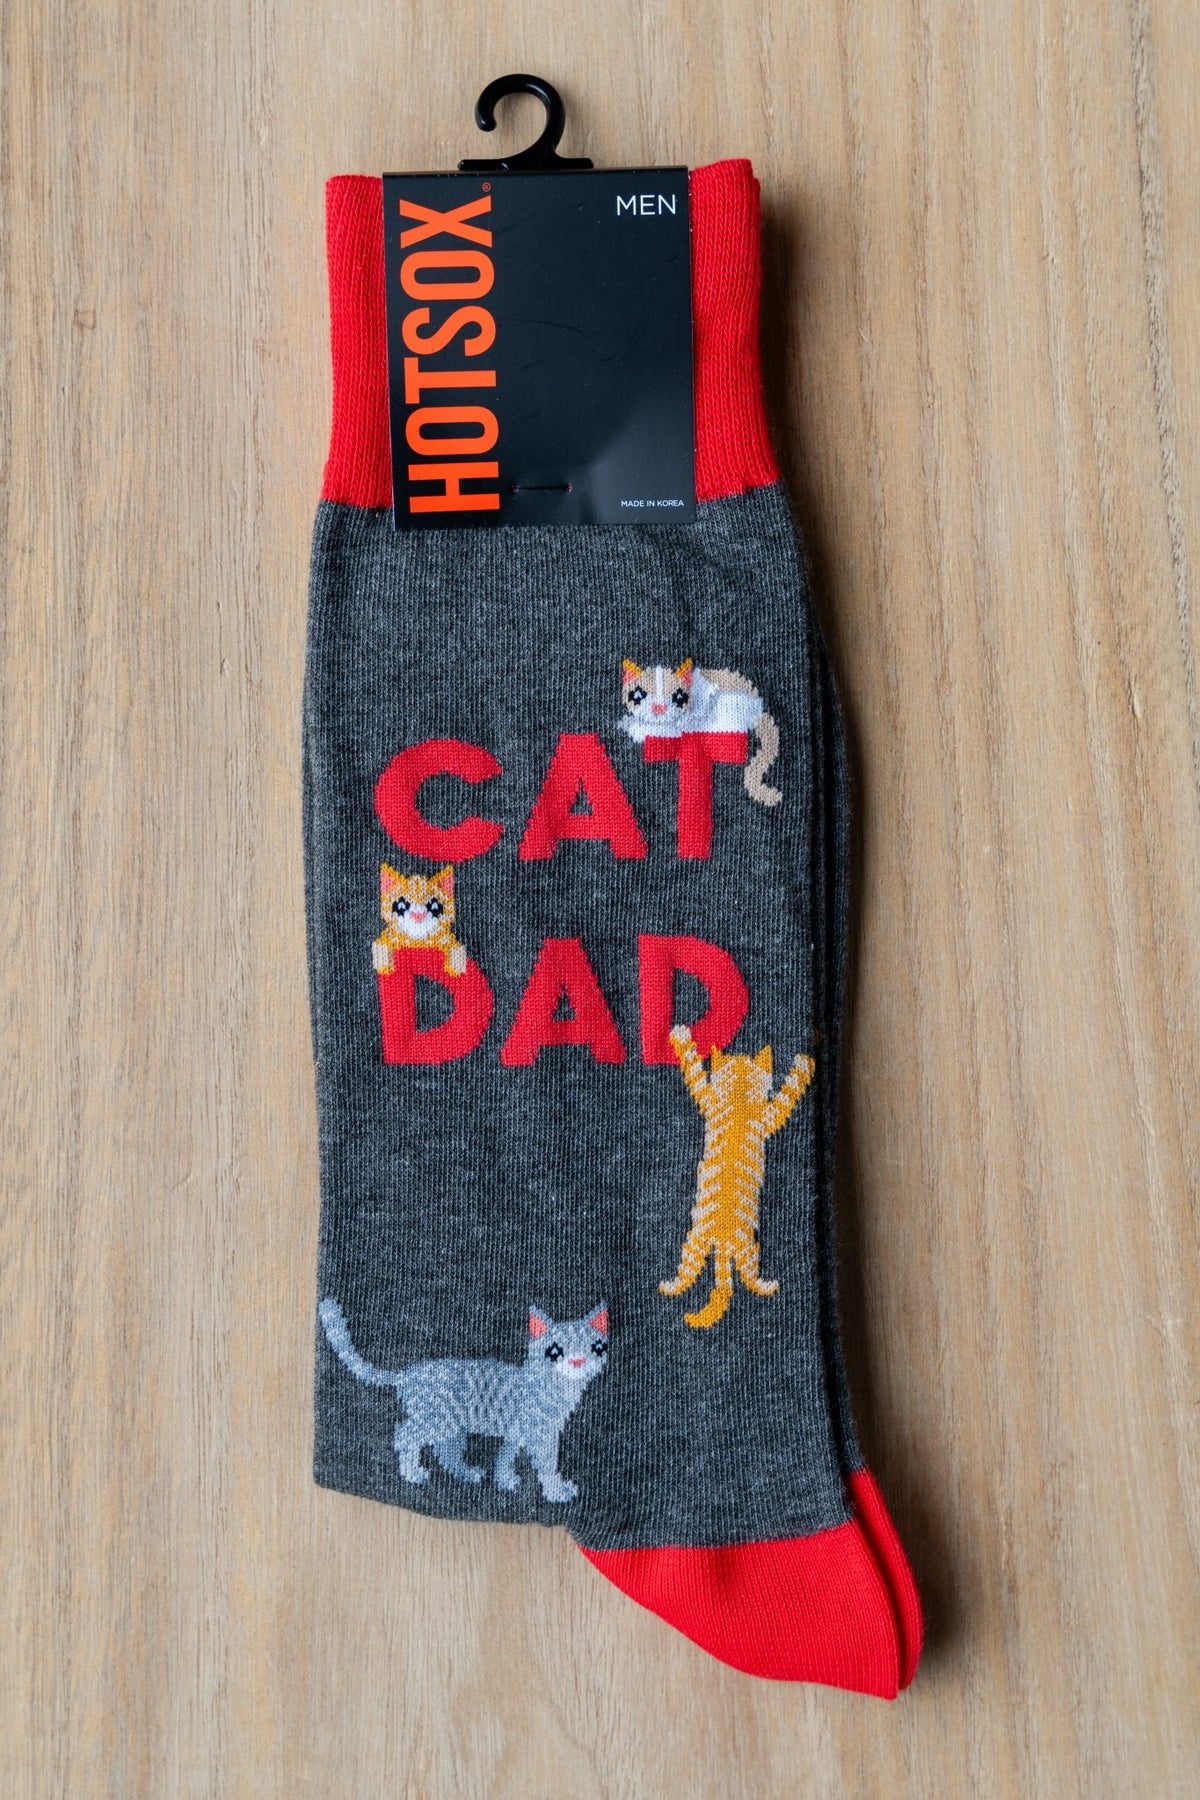 HotSox cat dad socks charcoal - Trendy Socks at Lush Fashion Lounge Boutique in Oklahoma City